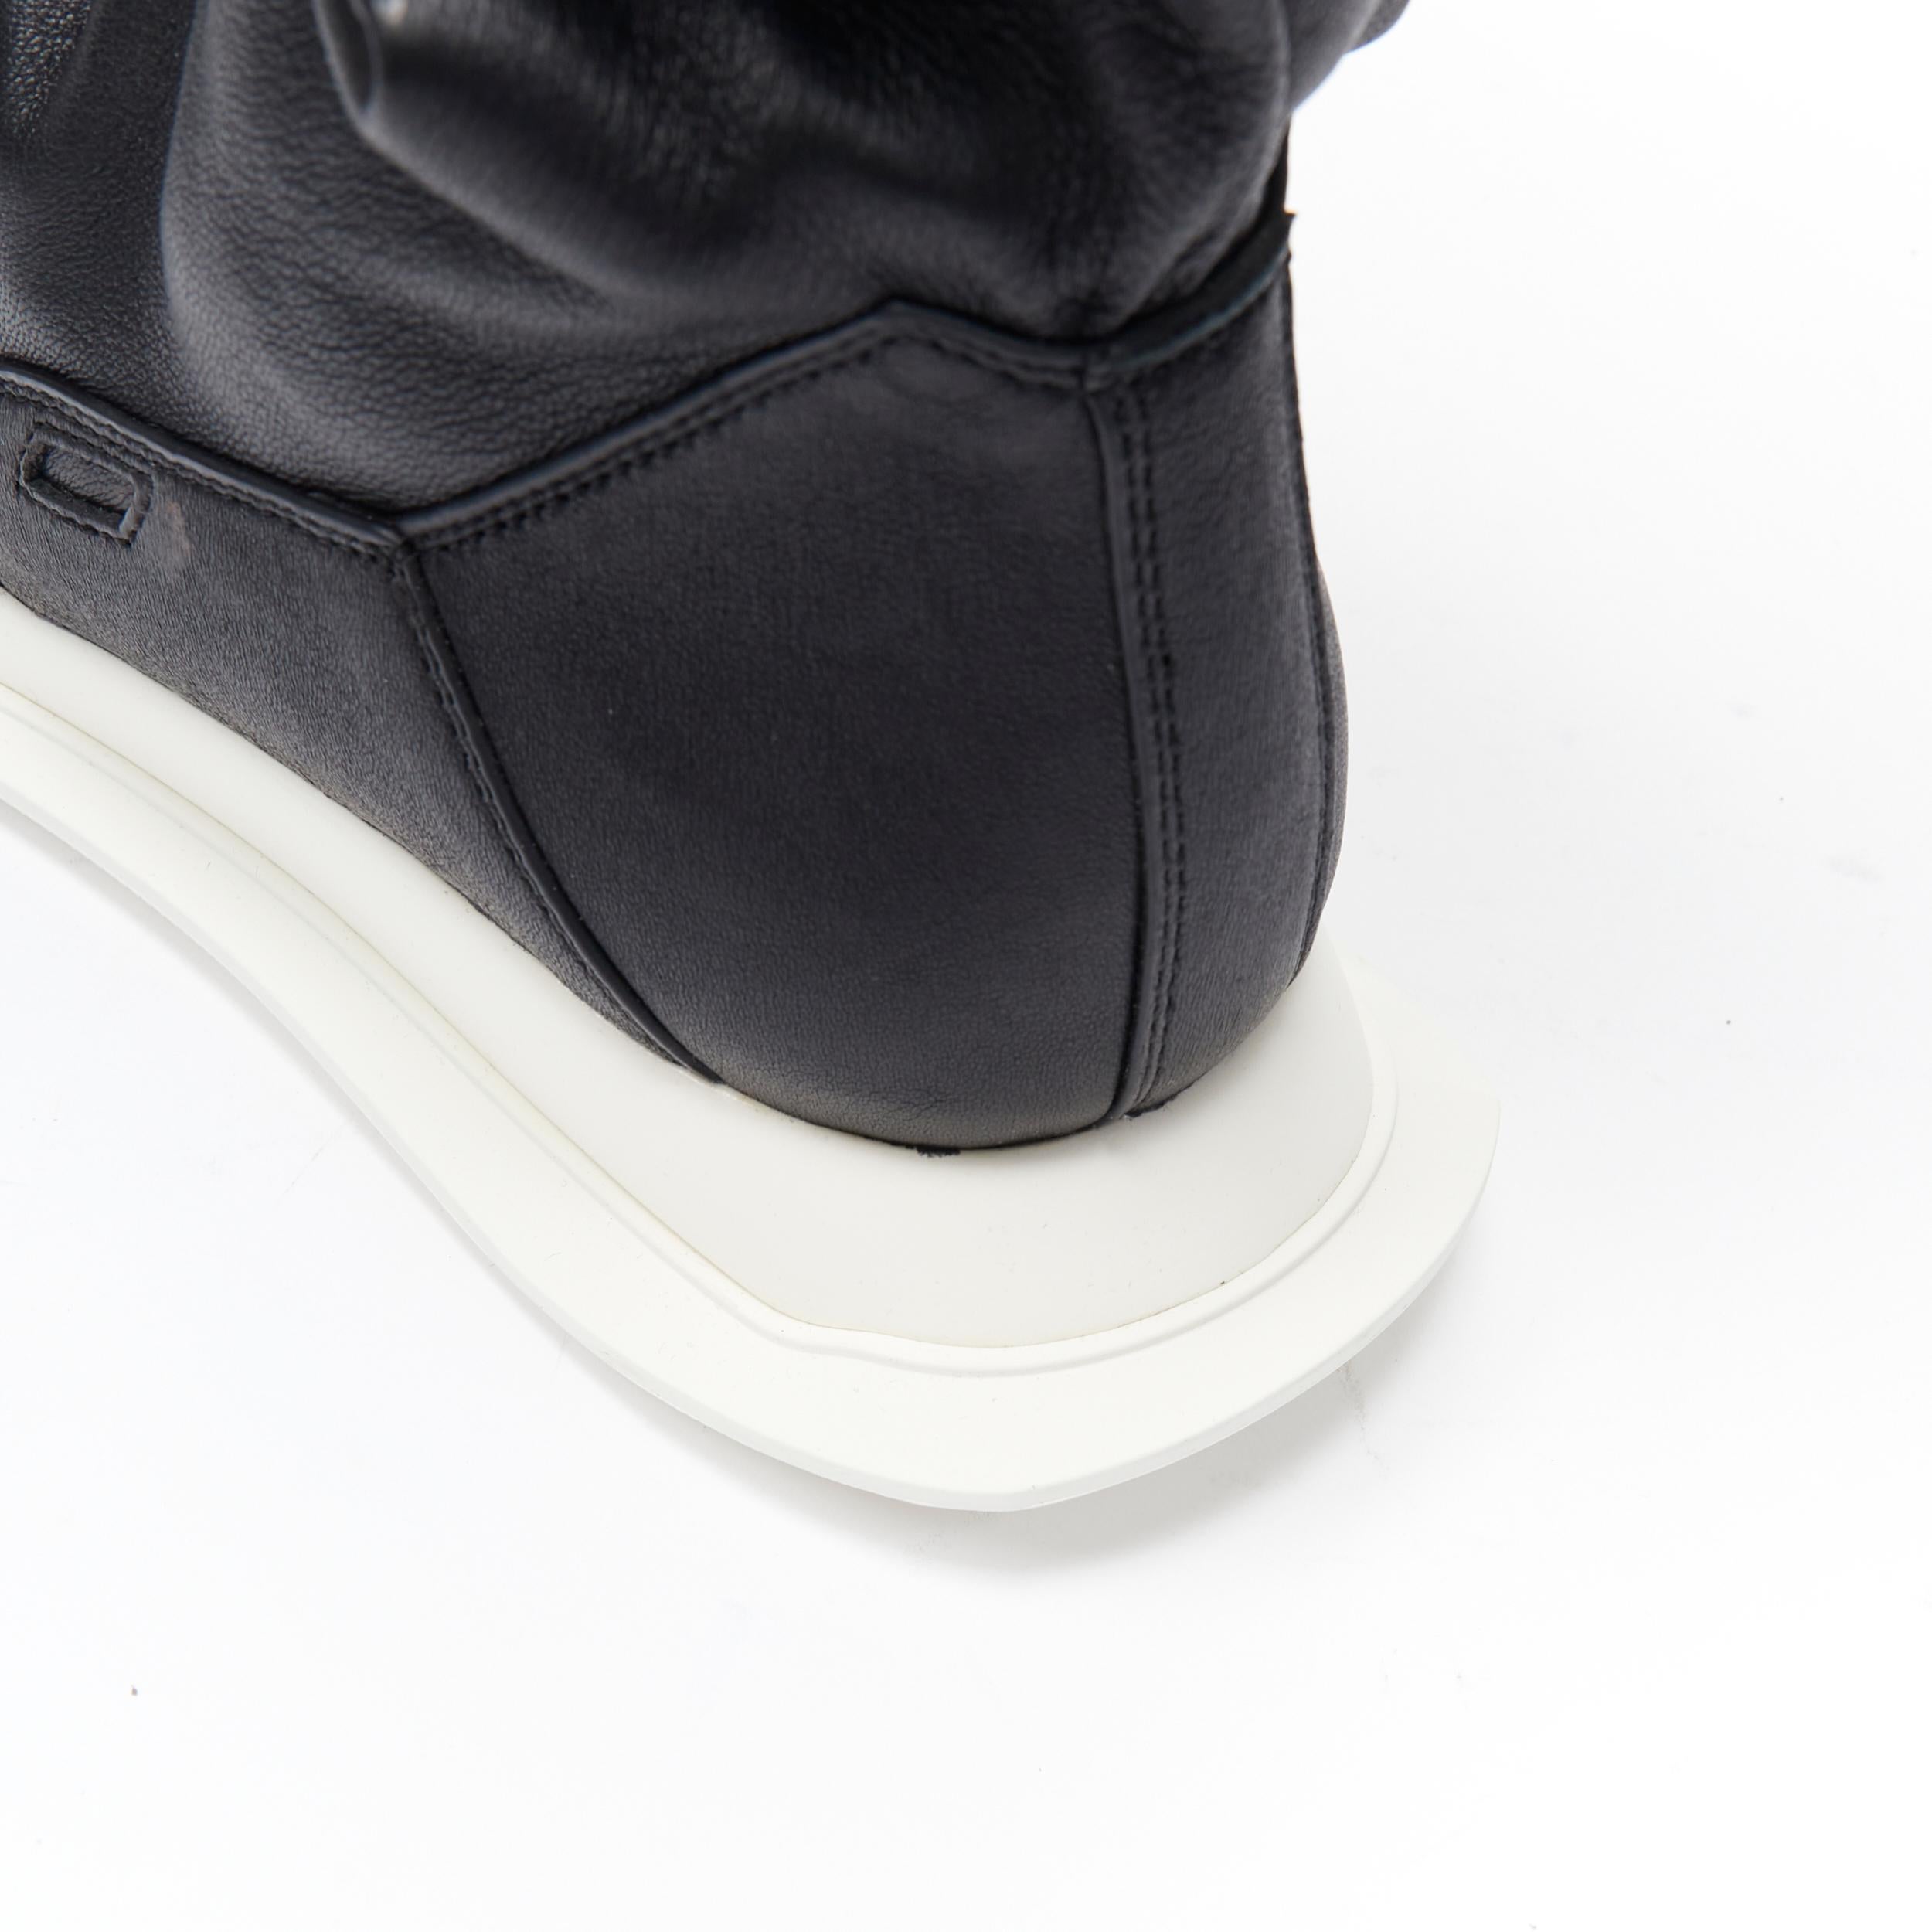 new RICK OWENS Runway New Runner Stretch silver black stocking boot sneaker EU36 For Sale 2